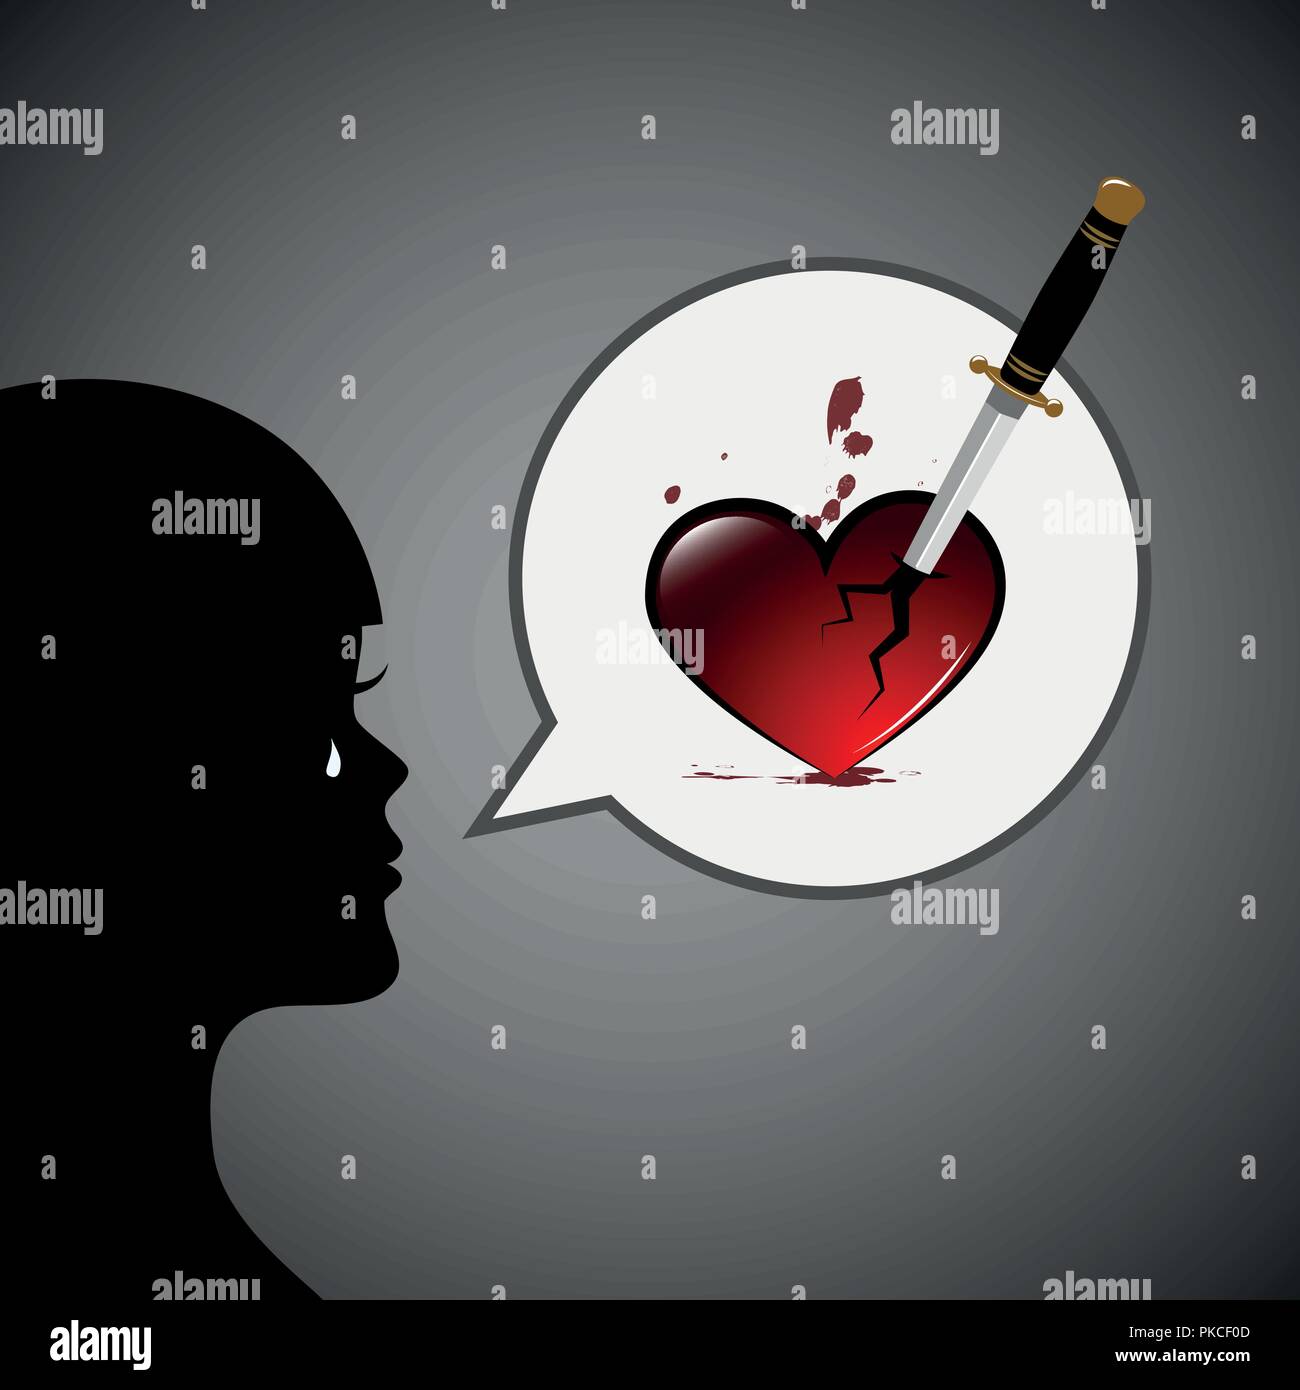 woman silhouette talk about broken heart with blood and dagger vector illustration EPS10 Stock Vector